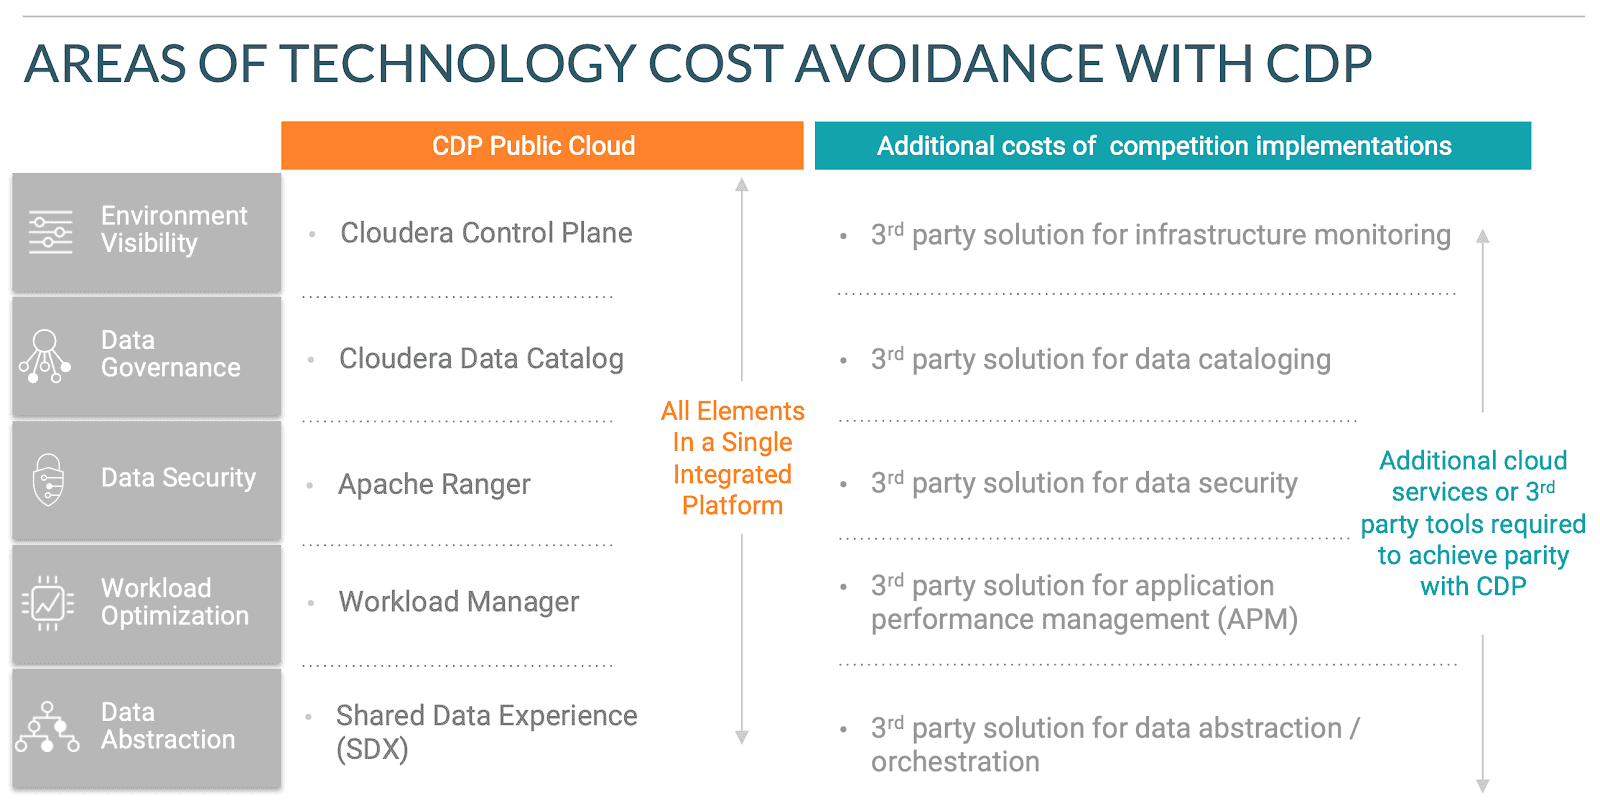 Areas of Technology Cost Avoidance with CDP